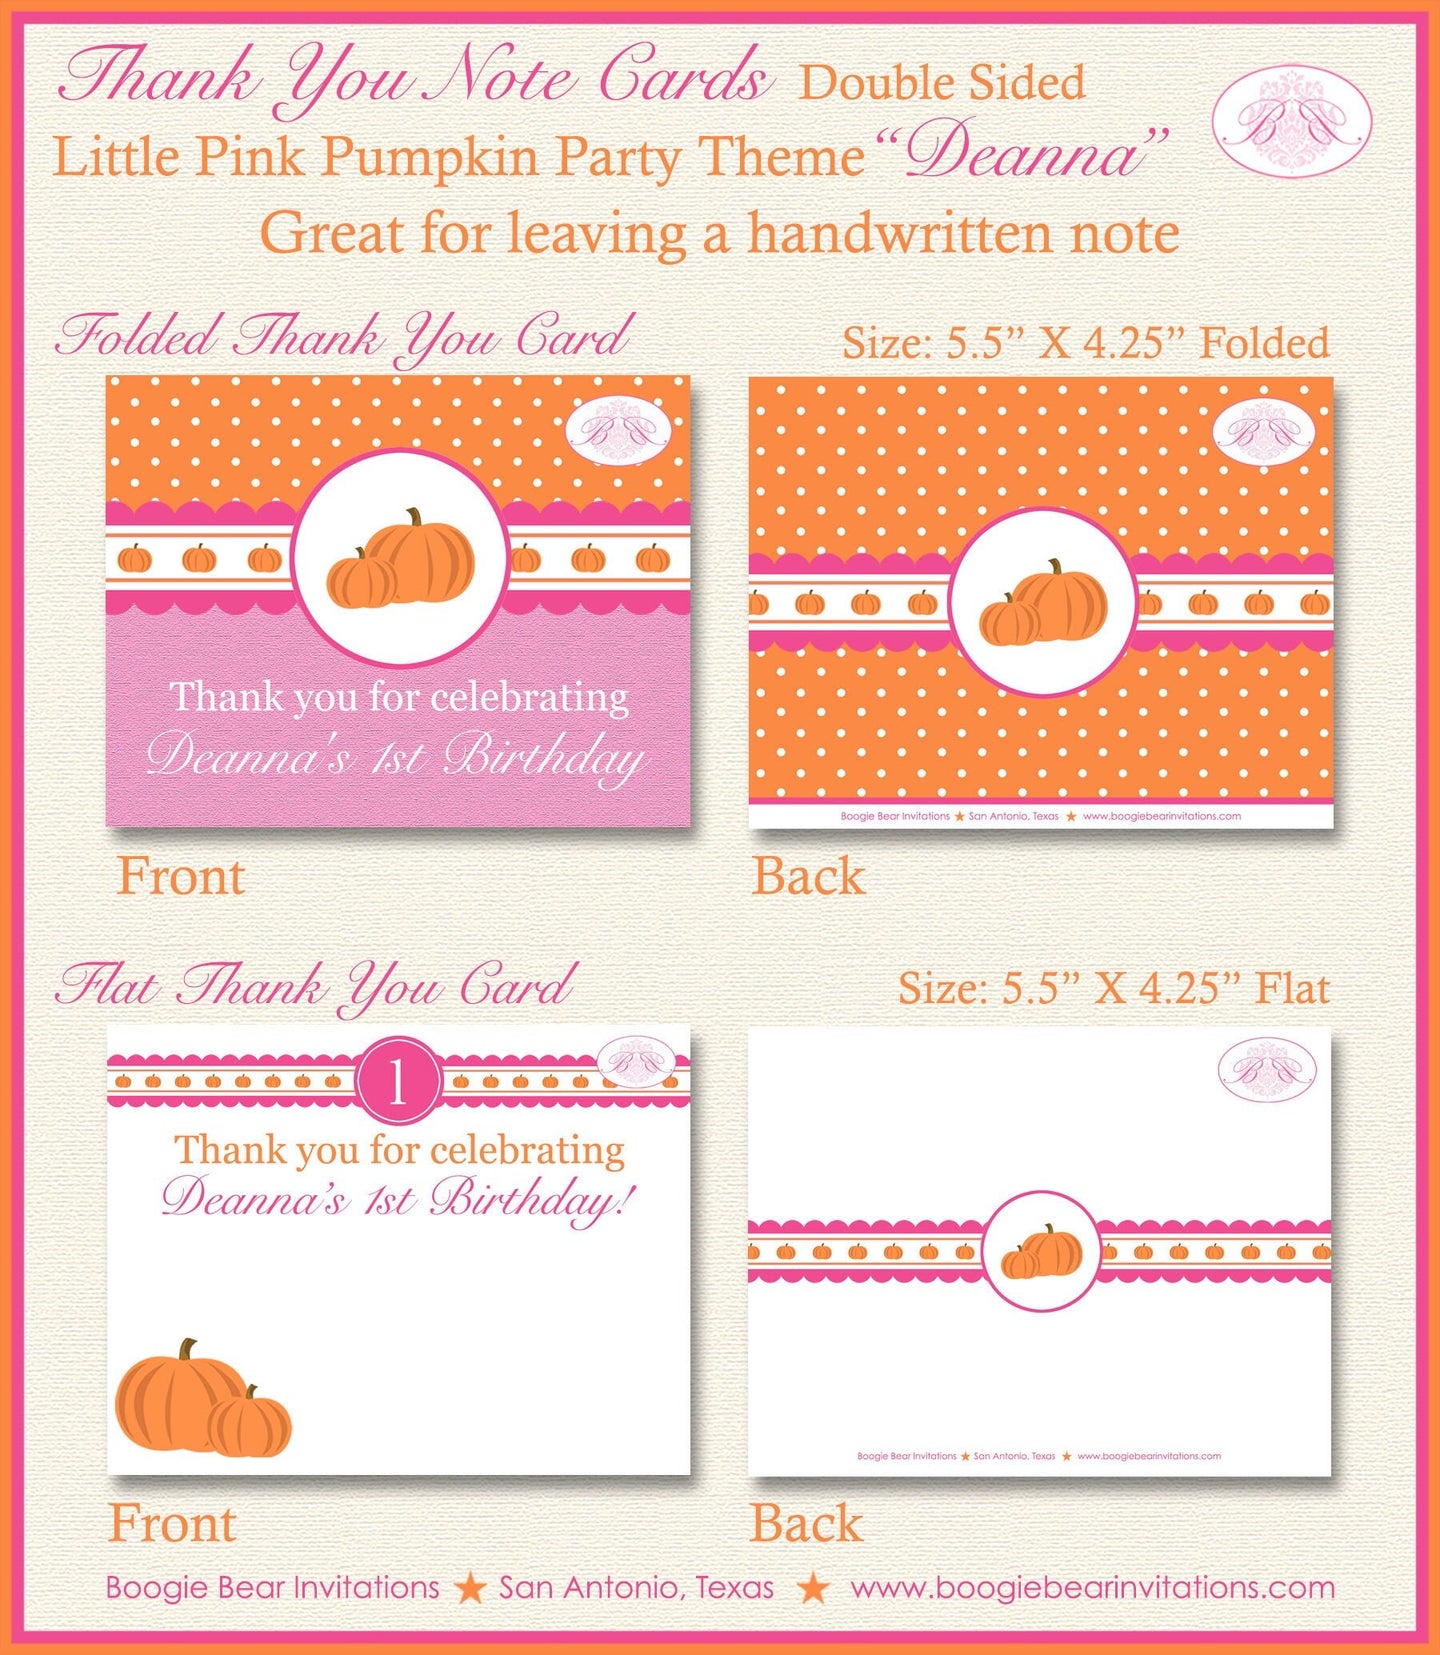 Pink Pumpkin Party Thank You Card Birthday Girl Fall Autumn Harvest Pink Orange Little Rustic Boogie Bear Invitations Deanna Theme Printed